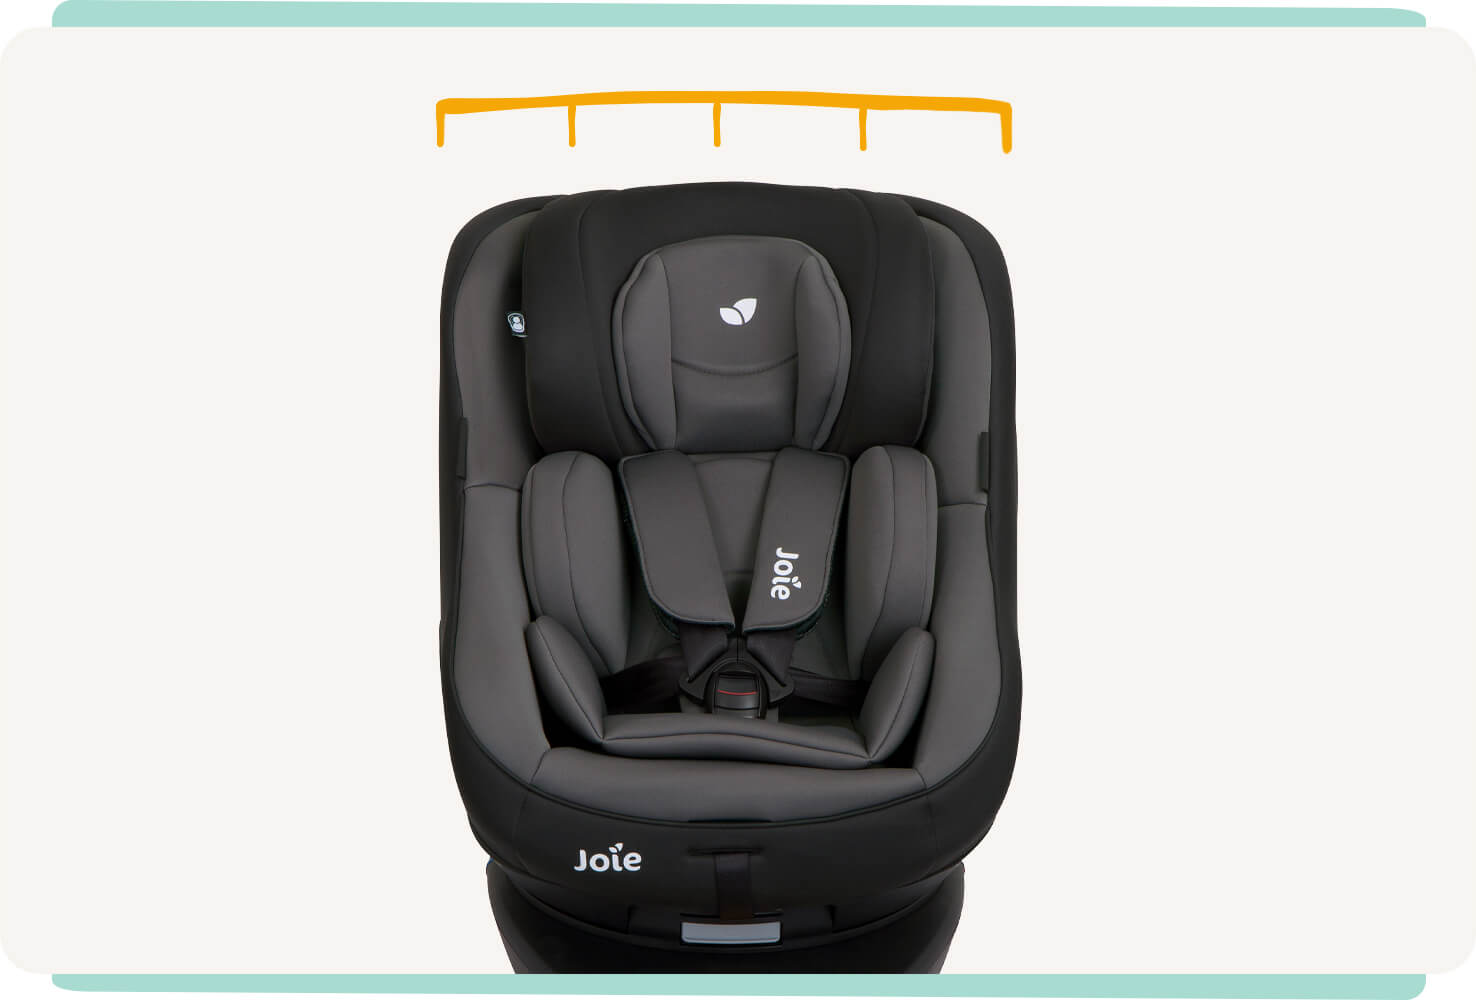  Joie spin 360 car seat in gray and black straight on with ruler icon above the seat. 